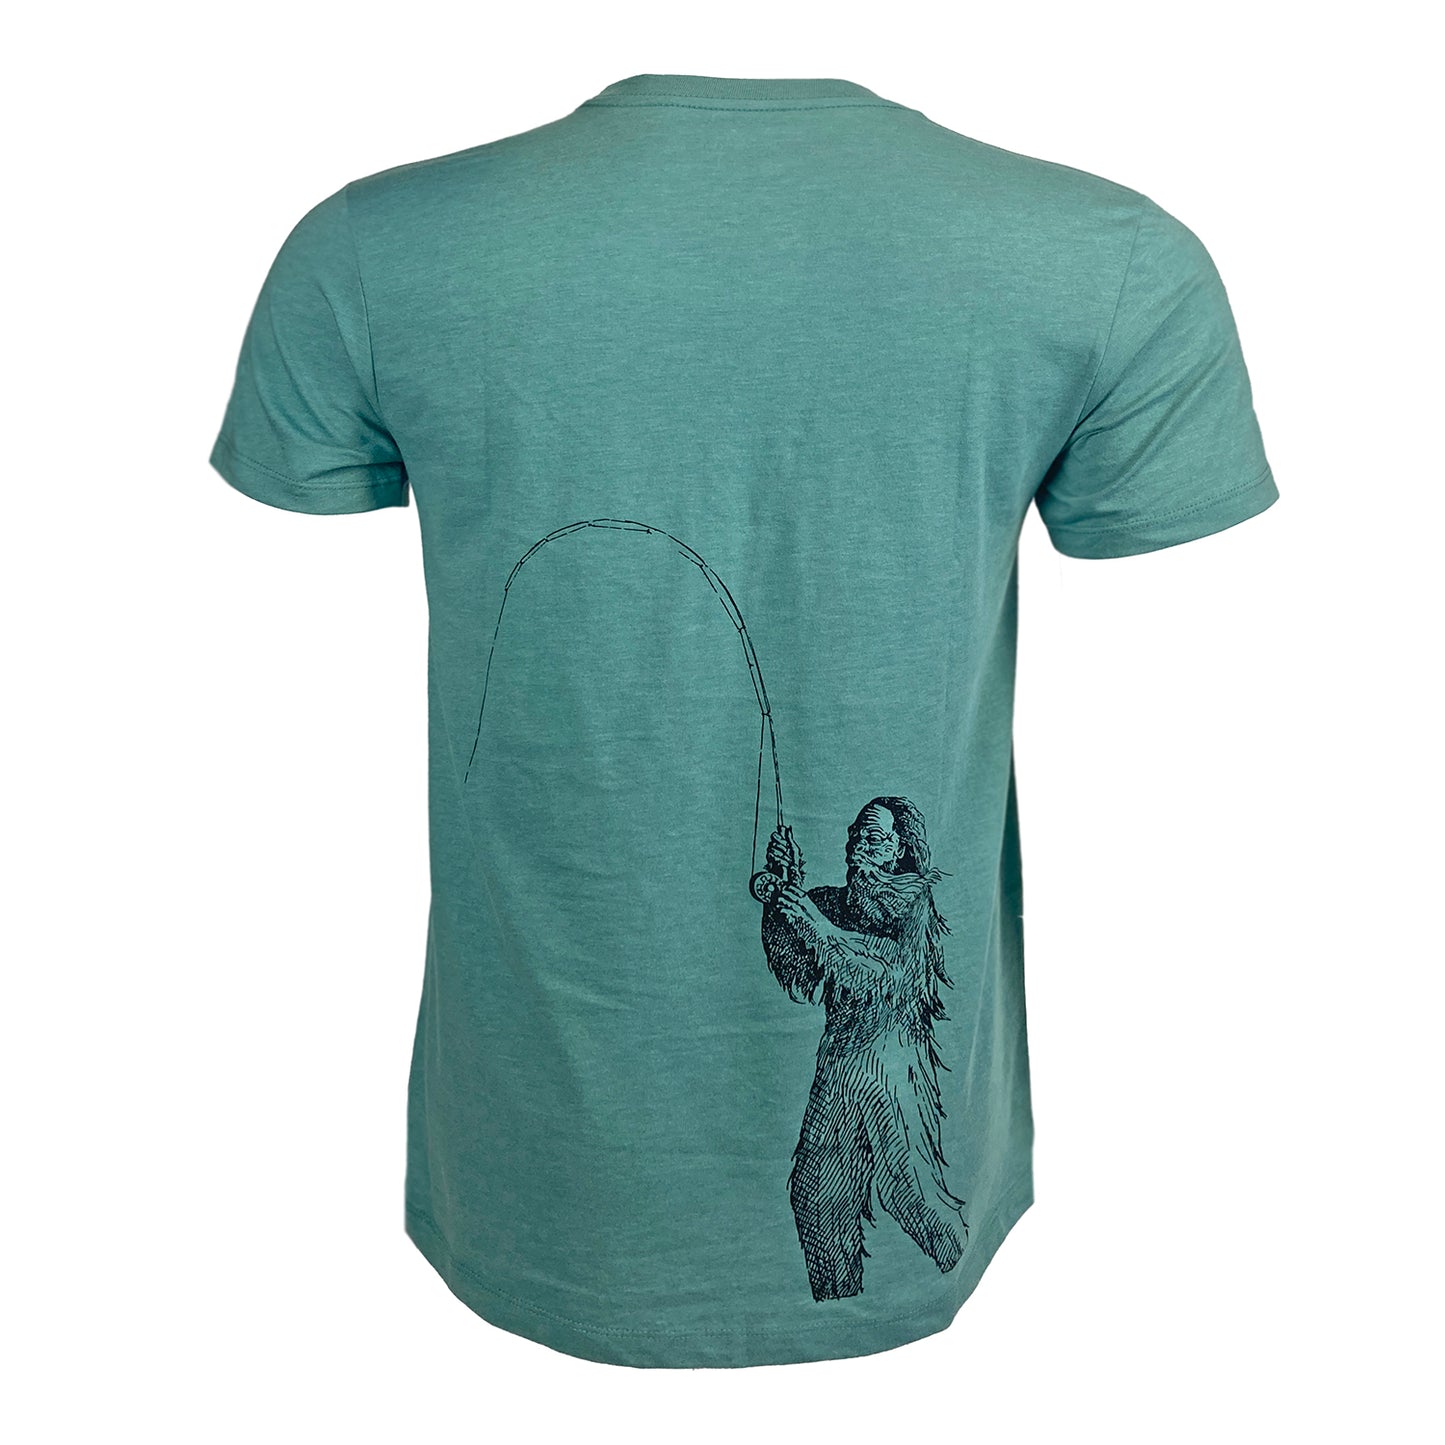 Blue green tee shown from the back with artistically rendered fishing sasquatch on the wearers lower right back.